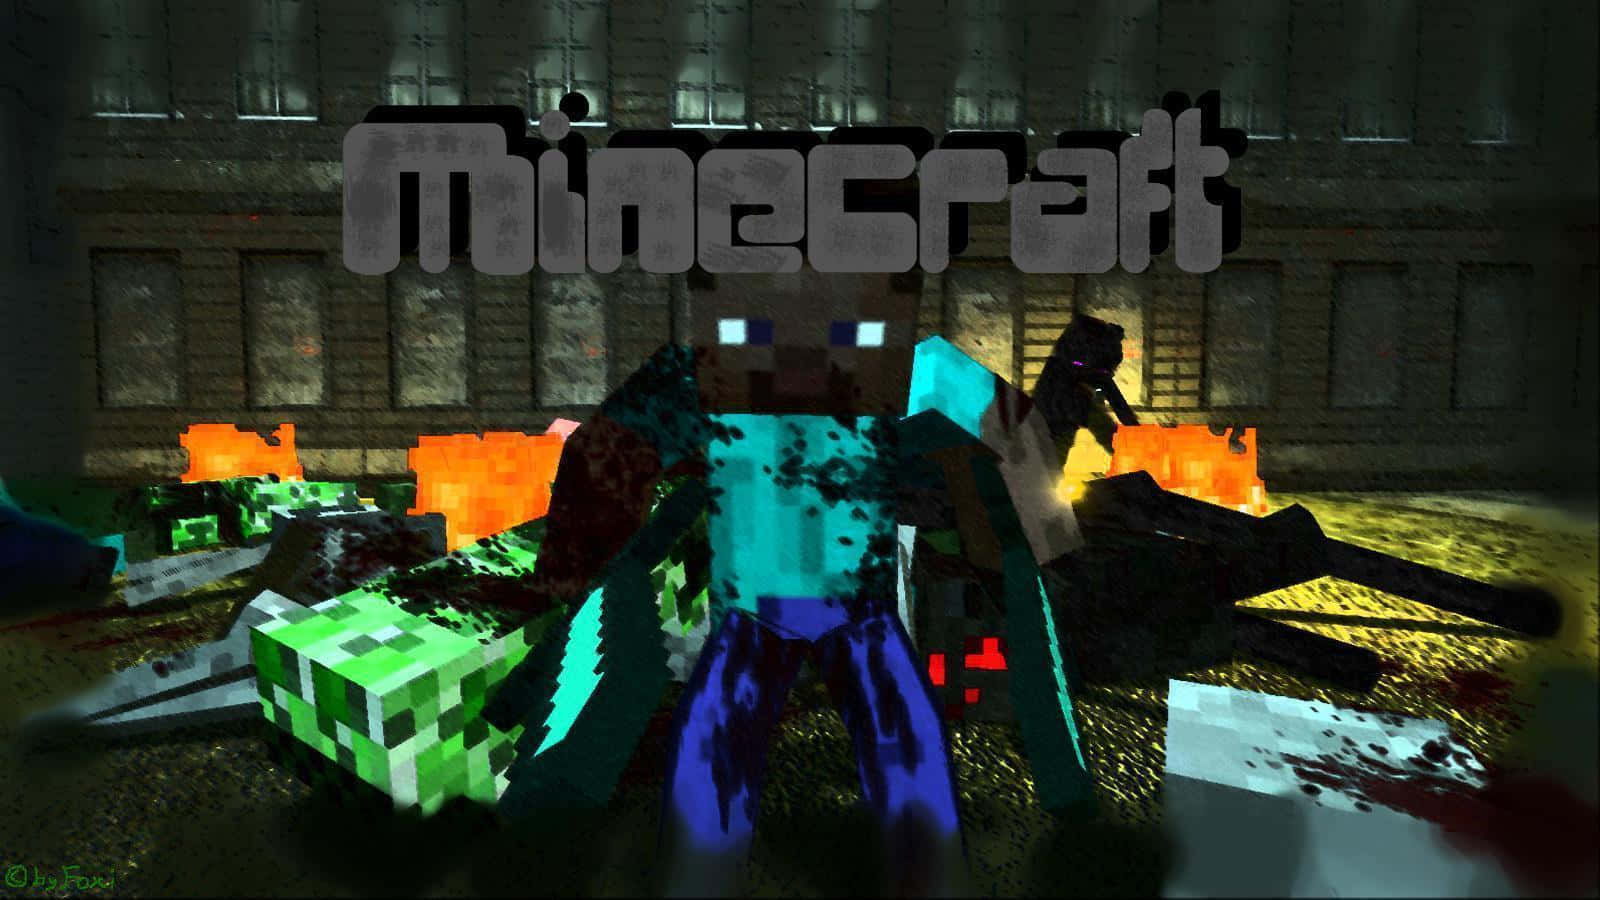 Minecraft - A Man With A Sword And A Zombie